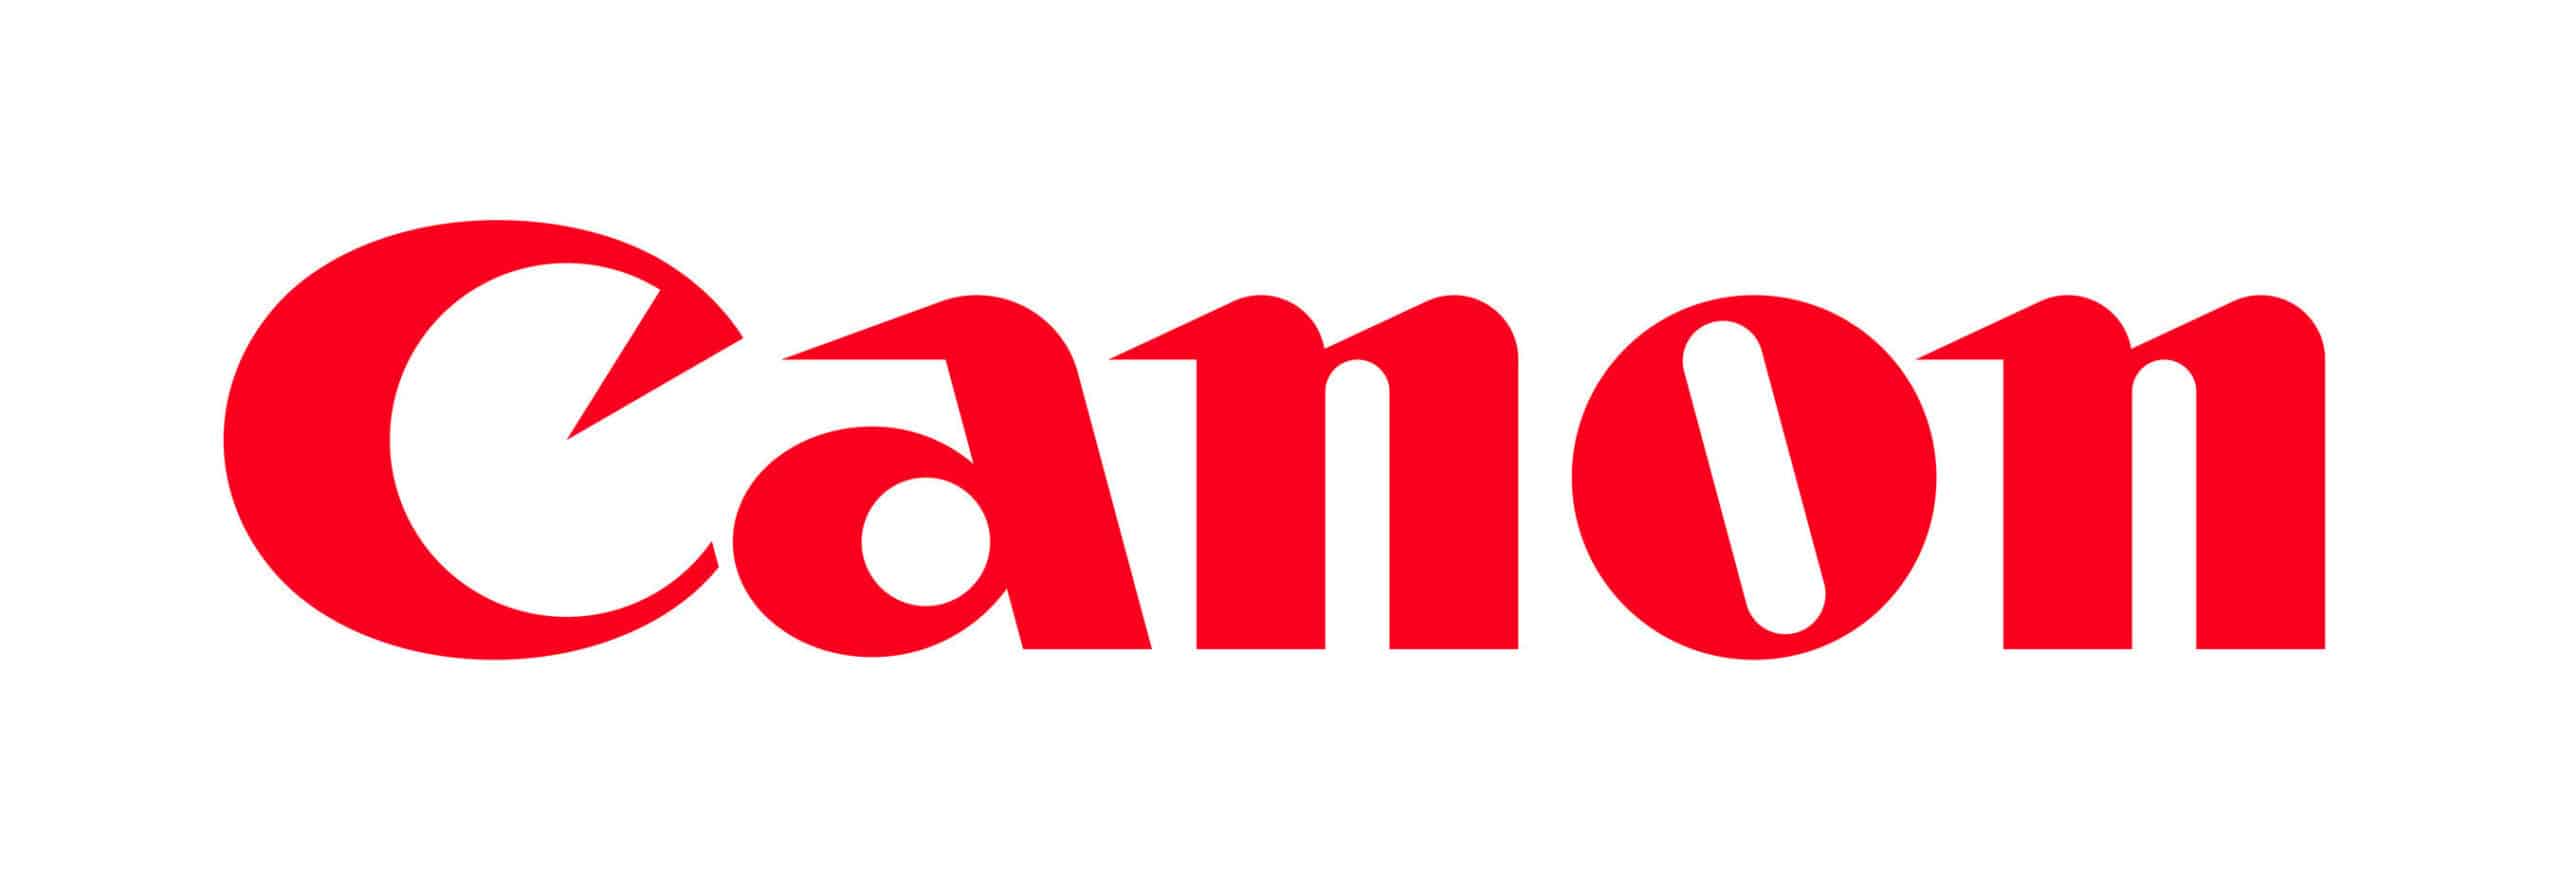 APPROVED CANON<br>
PRINTER RESELLER